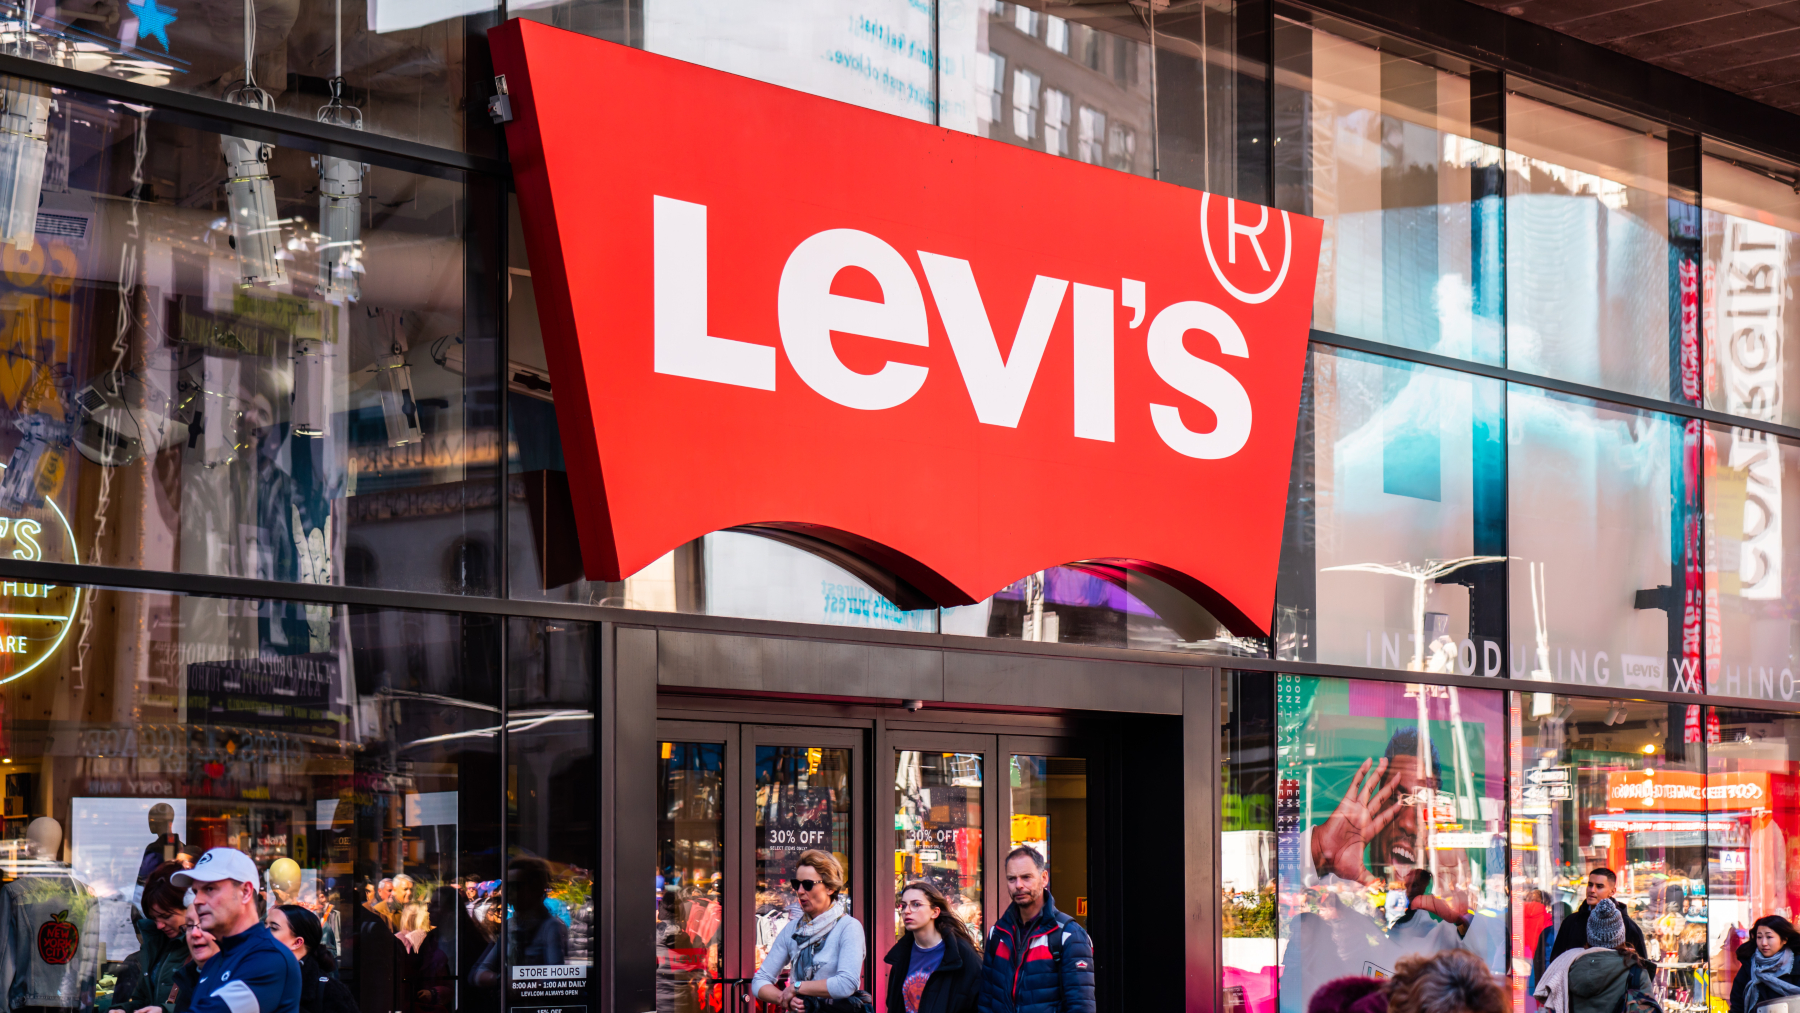 Can Levi's Turn Regular Employees Into Data Scientists? | BoF